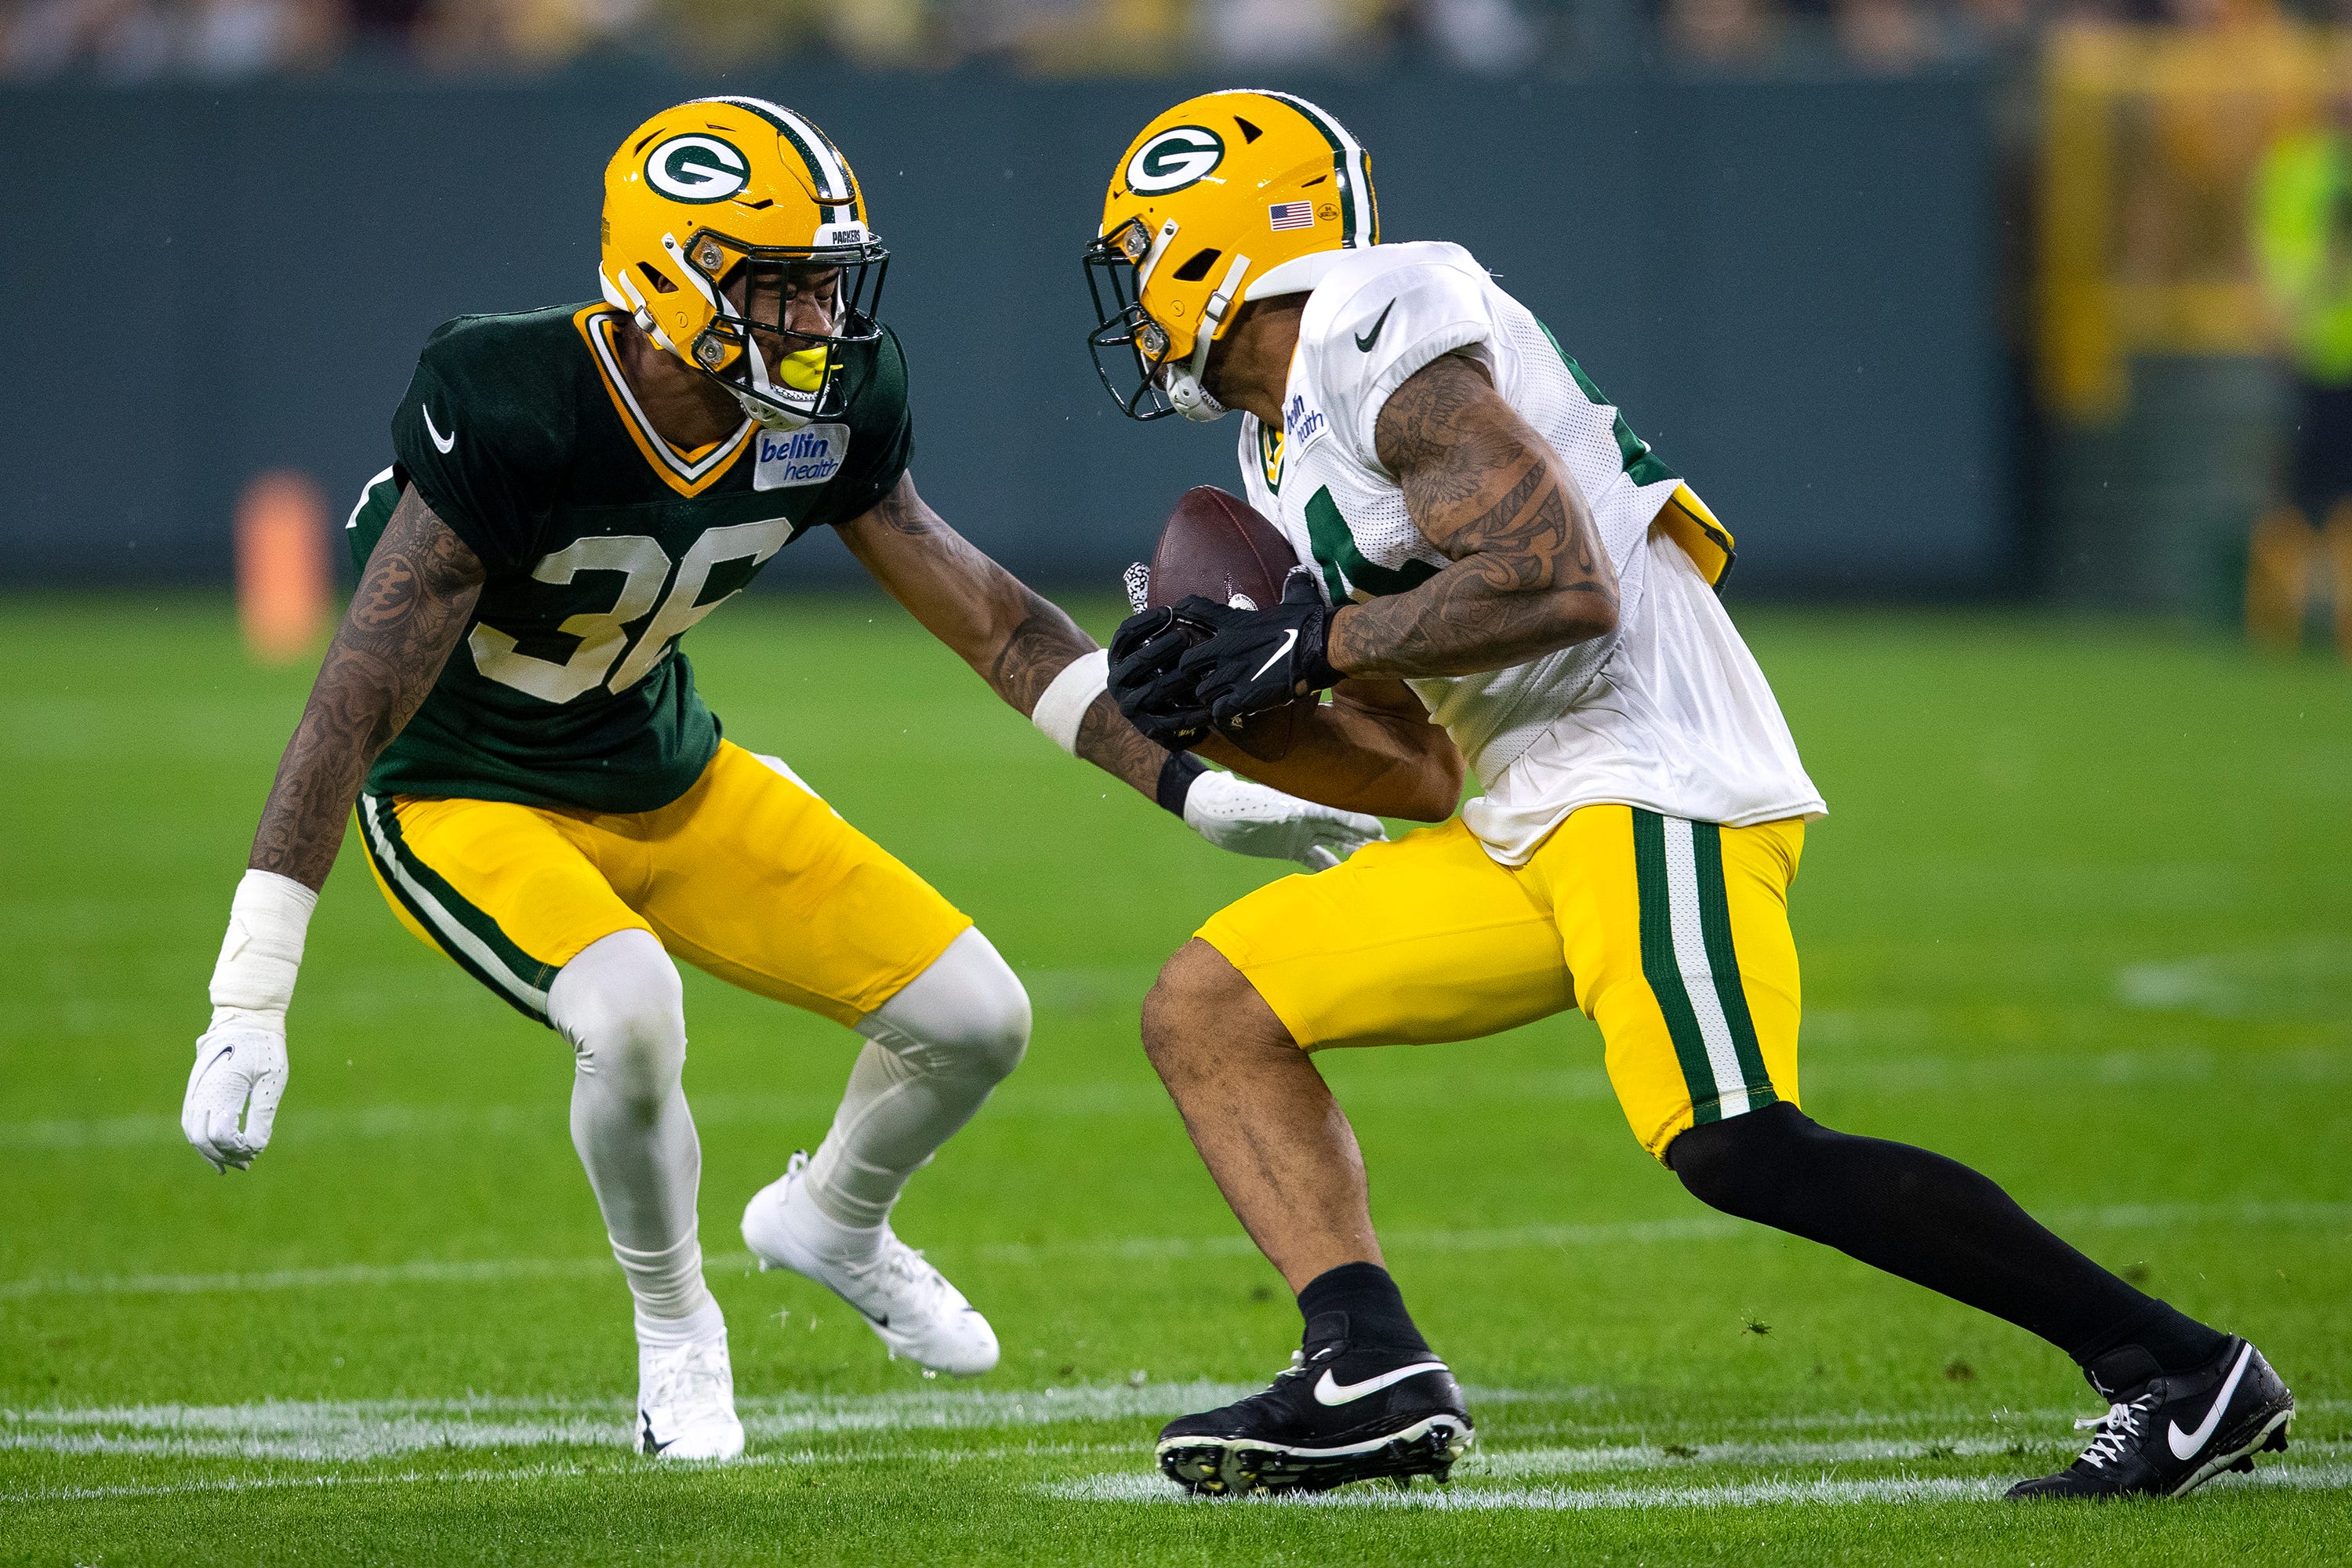 Green Bay Packers wide receiver Reggie Begelton (84) runs the ball against defensive back Vernon Scott (36) during Packers Family Night at Lambeau Field, Saturday, Aug. 7, 2021, in Green Bay, Wis. Samantha Madar/USA TODAY NETWORK-Wisconsin